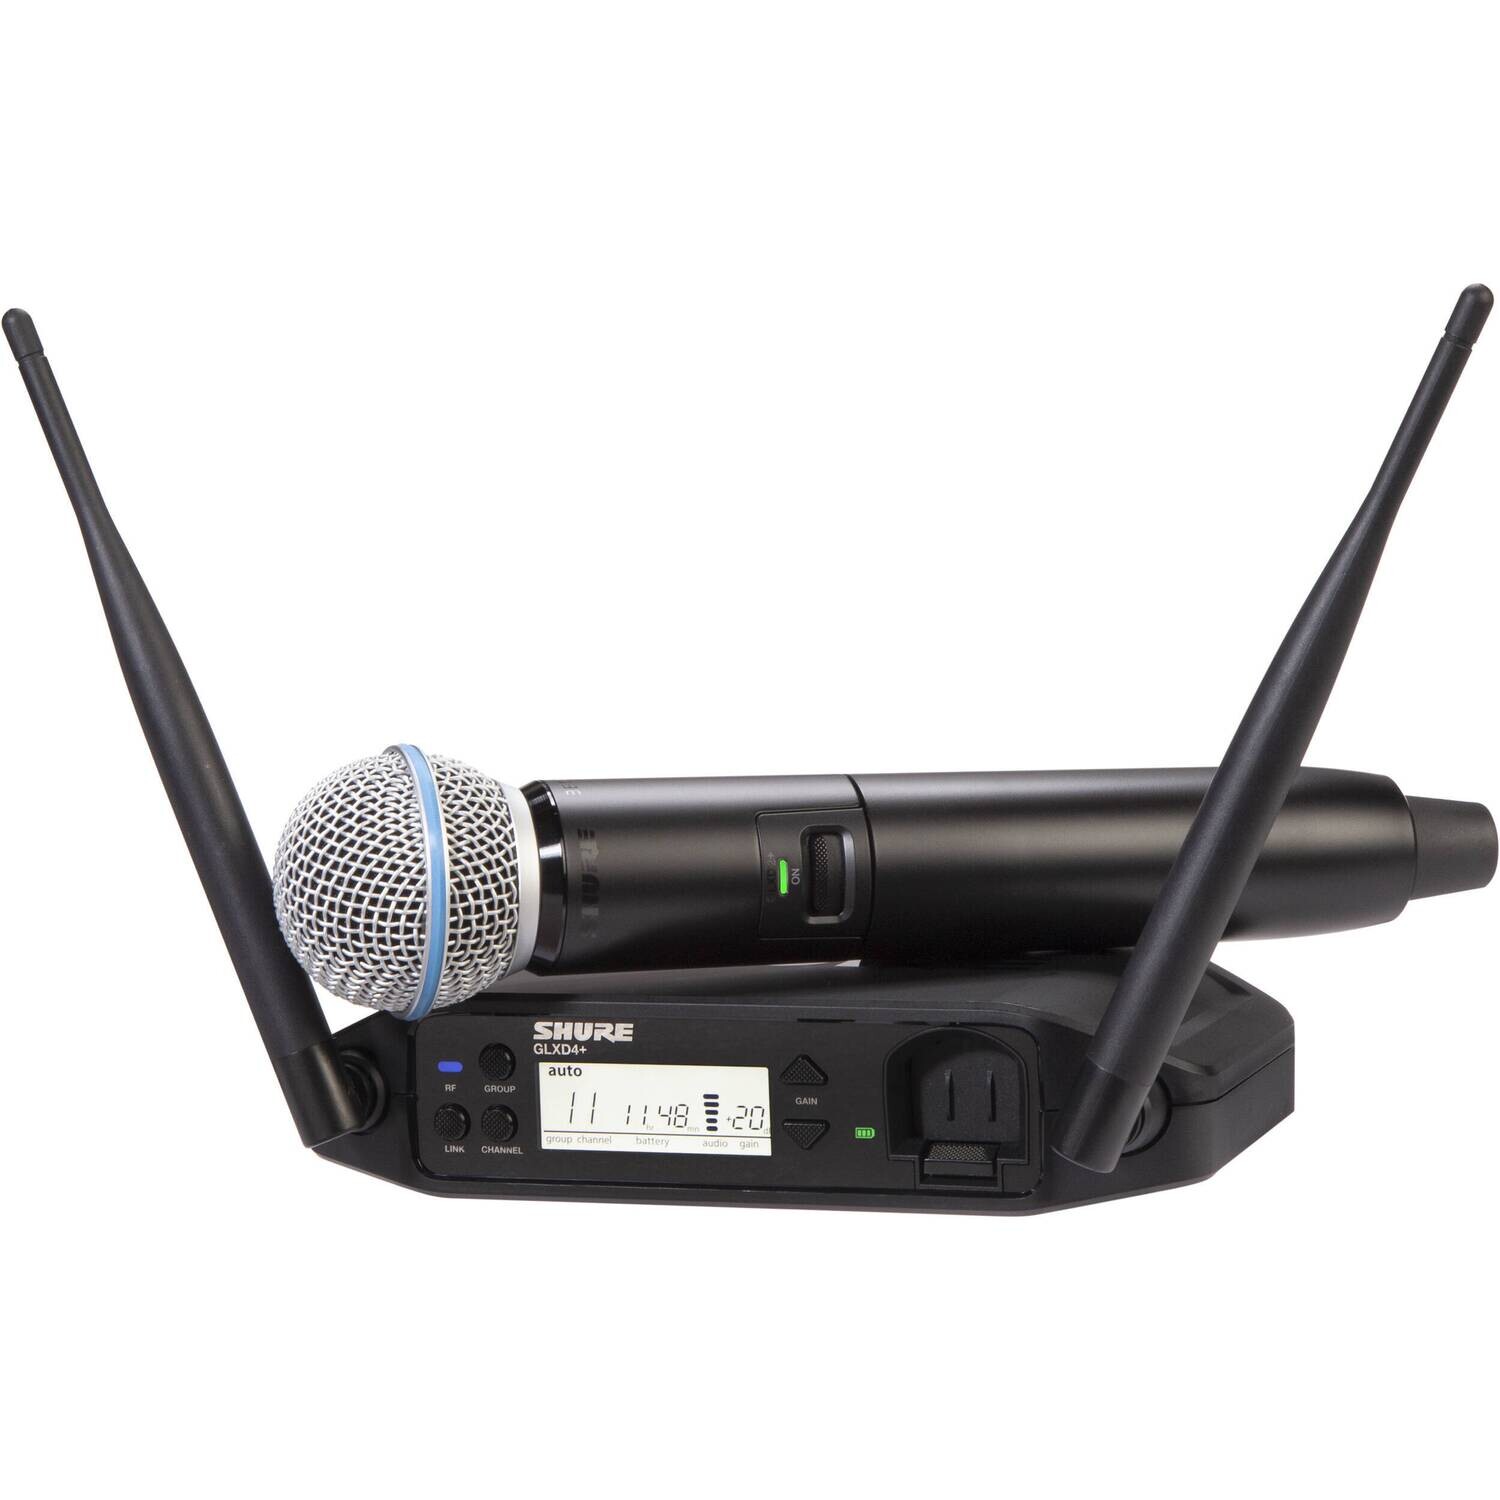 Shure GLXD24+/B58
(Digital Wireless Handheld System with BETA®58A Vocal Microphone)